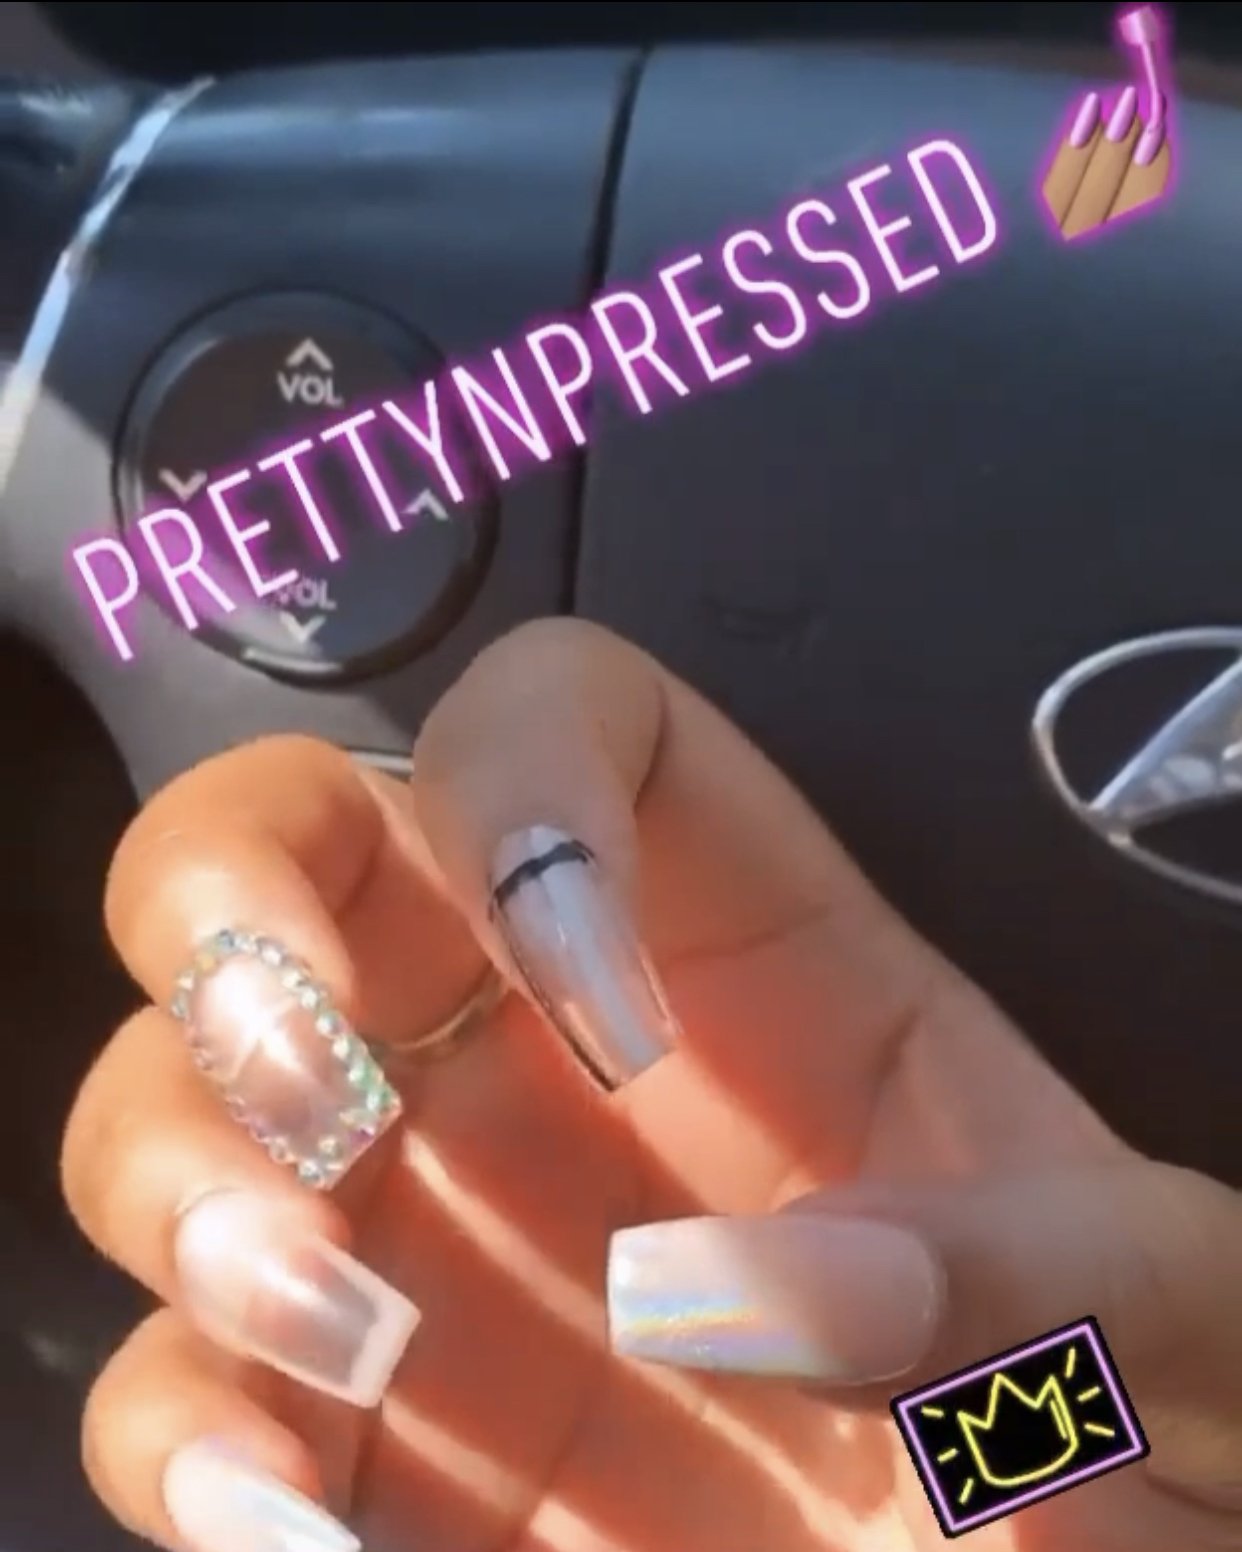 Clueless - "Pink Cher" - Pretty and Pressed Nails